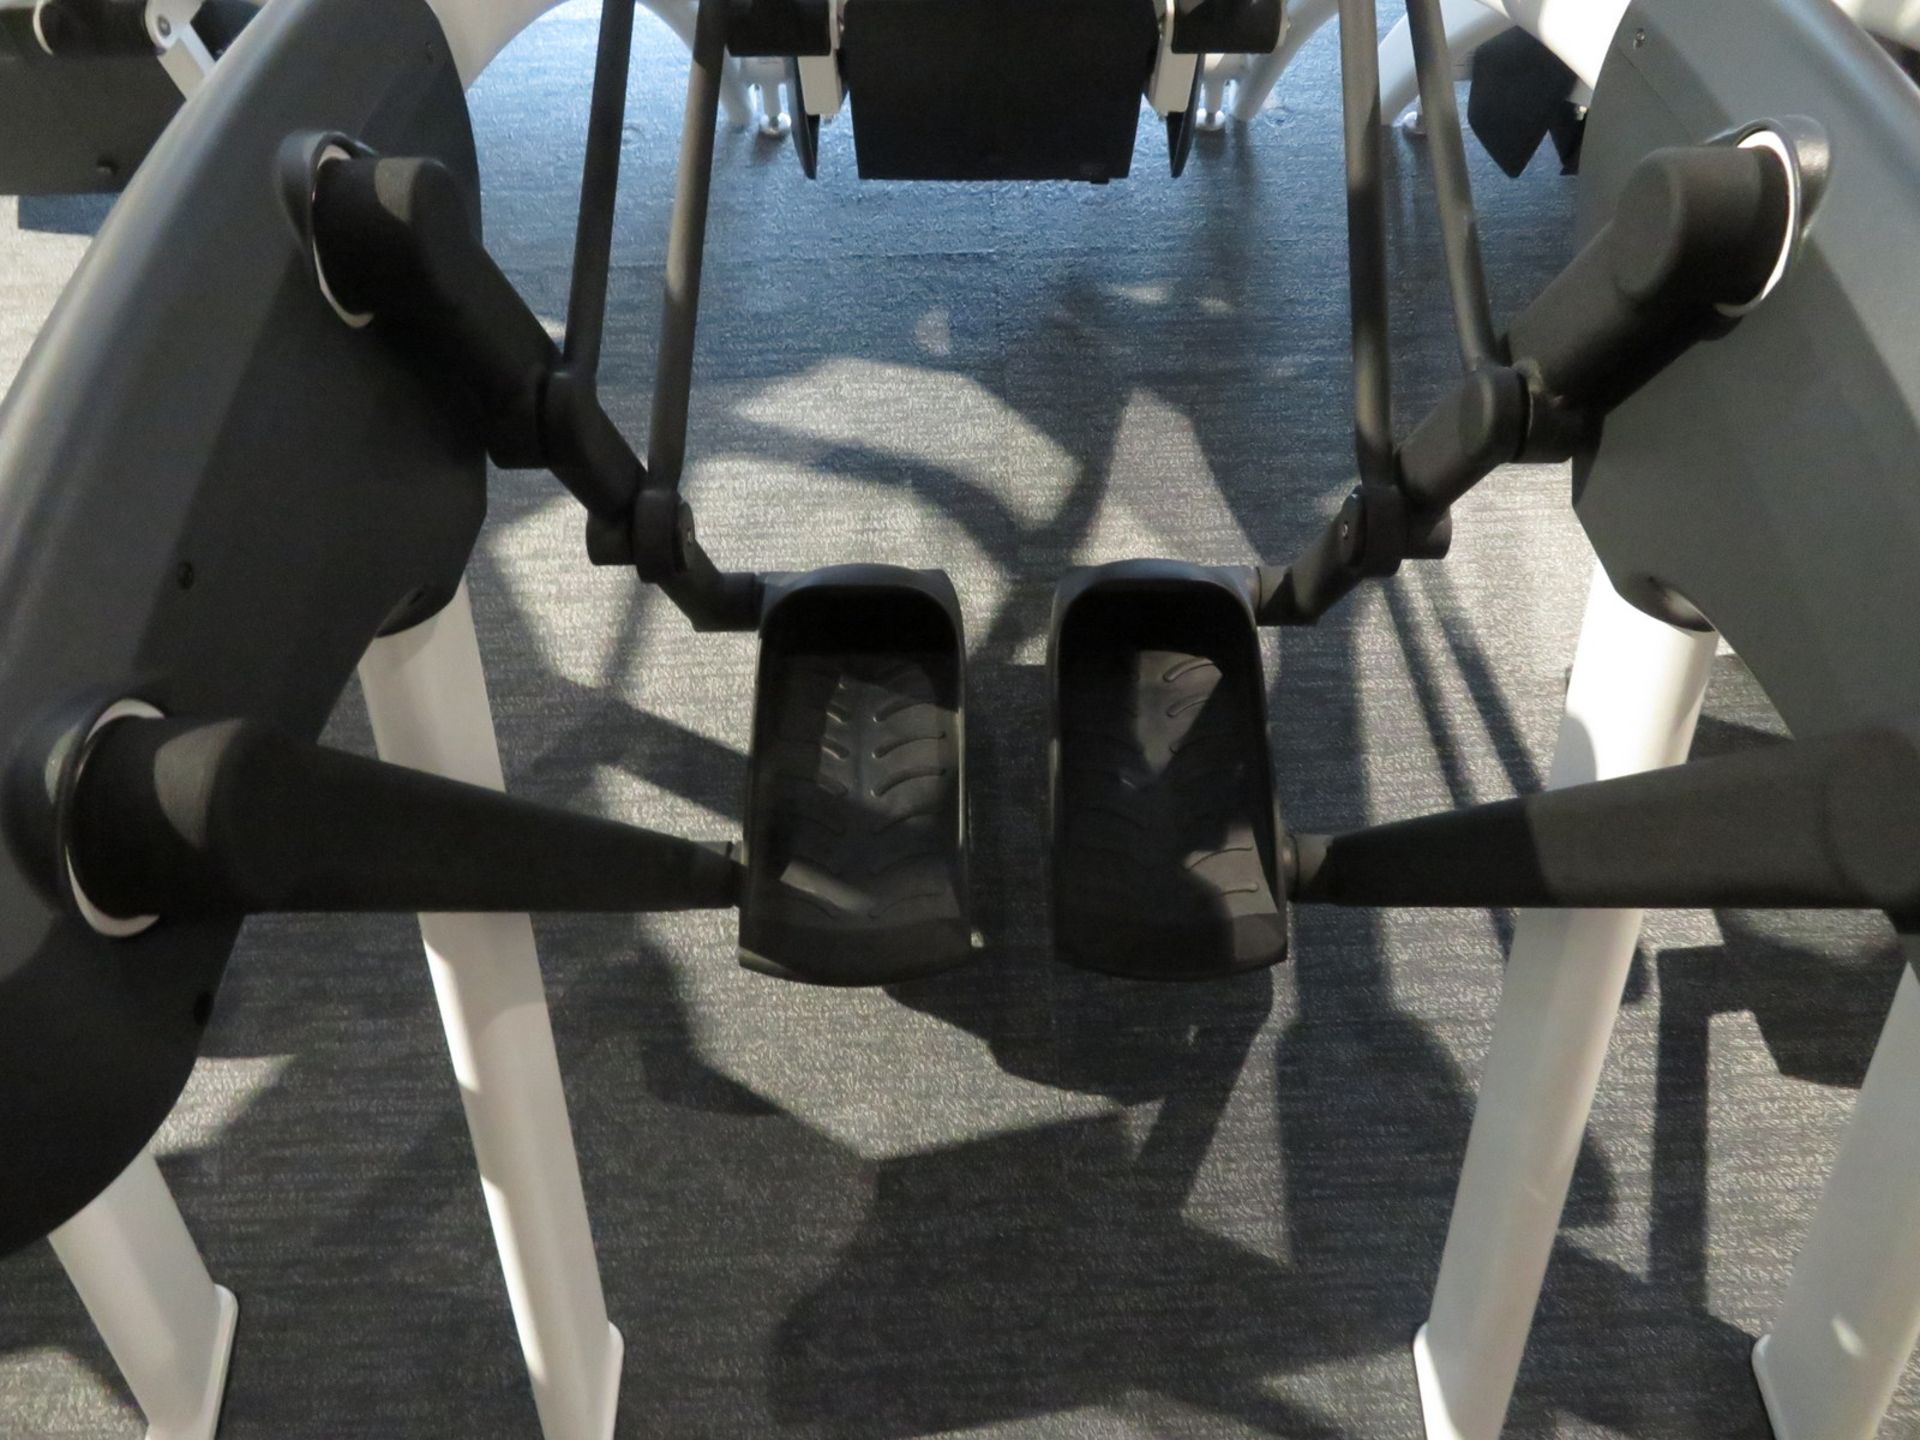 Cybex Arc Trainer Model: 627AT. Working Condition With TV Display Monitor. - Image 4 of 9